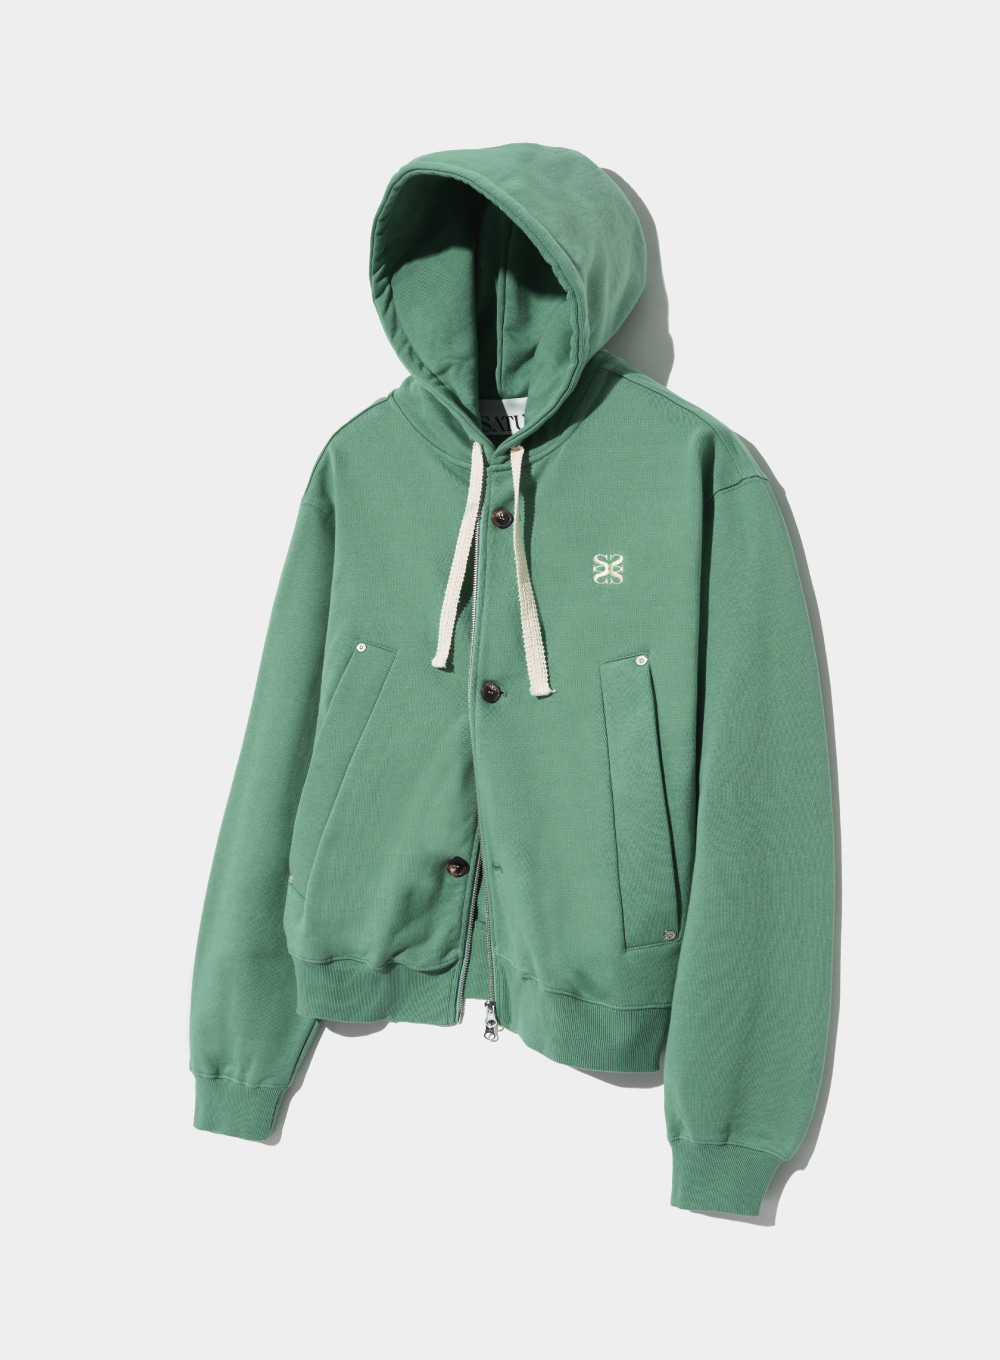 Teo Cotton All Day Hood Zip-Up - Sage Green